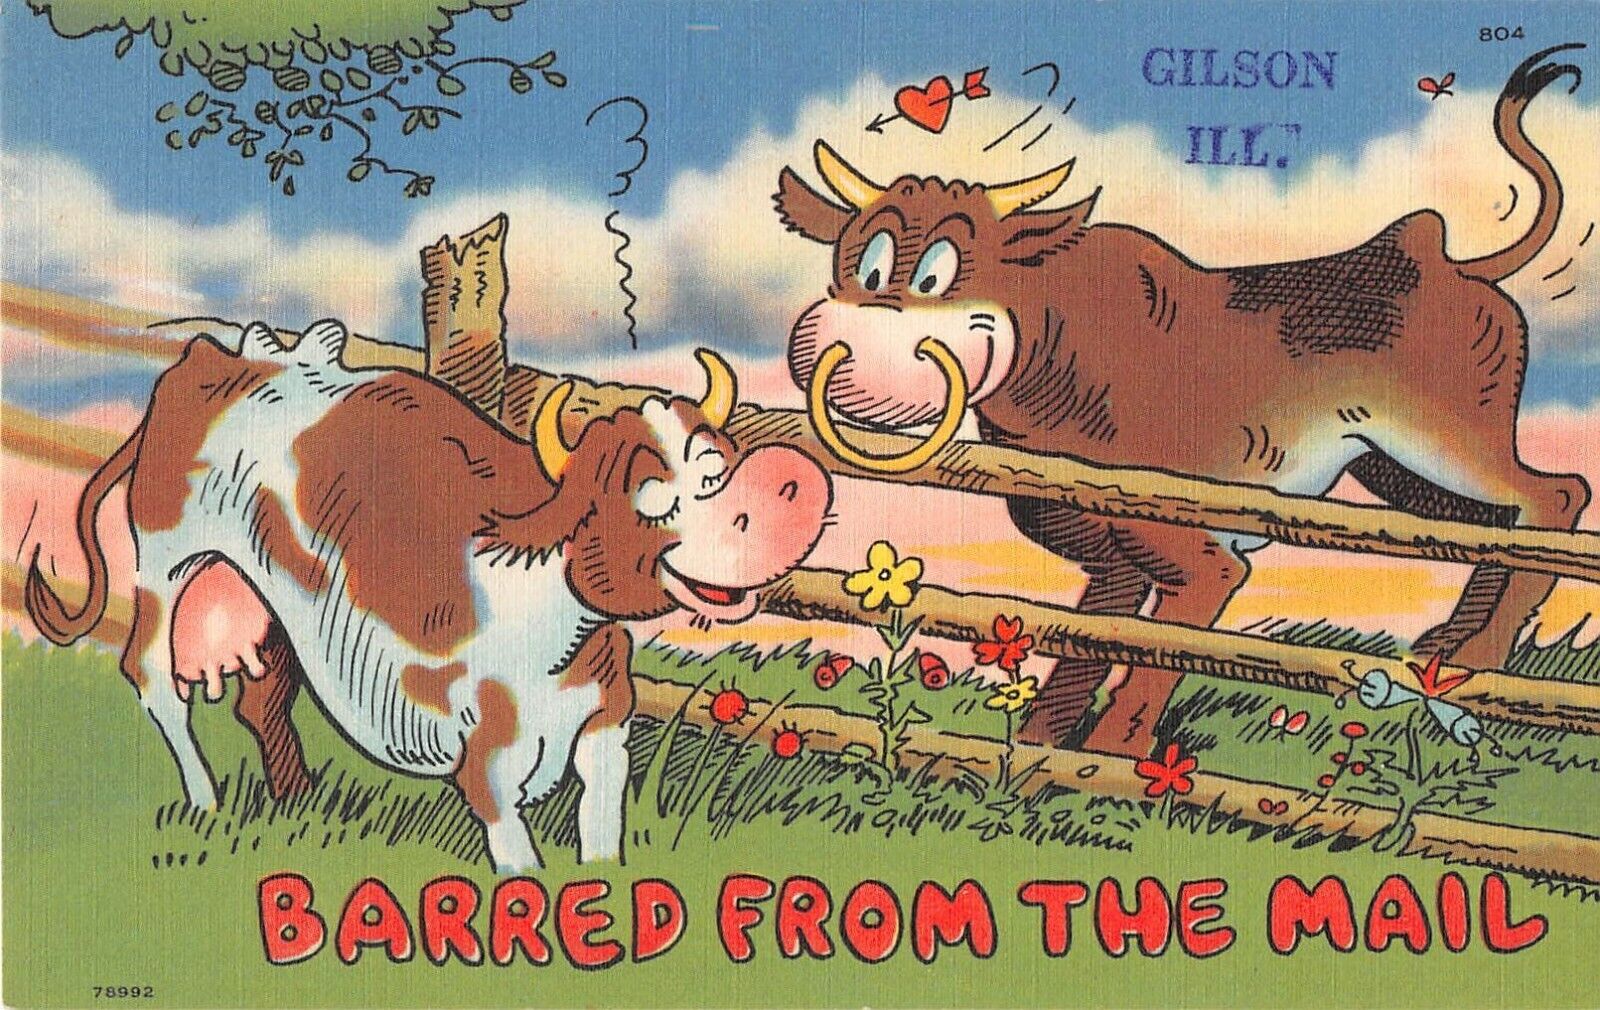 Cow & Bull Flirting Over Fence-Barred From the Mail-Comic Old Linen PC-Gilson,IL